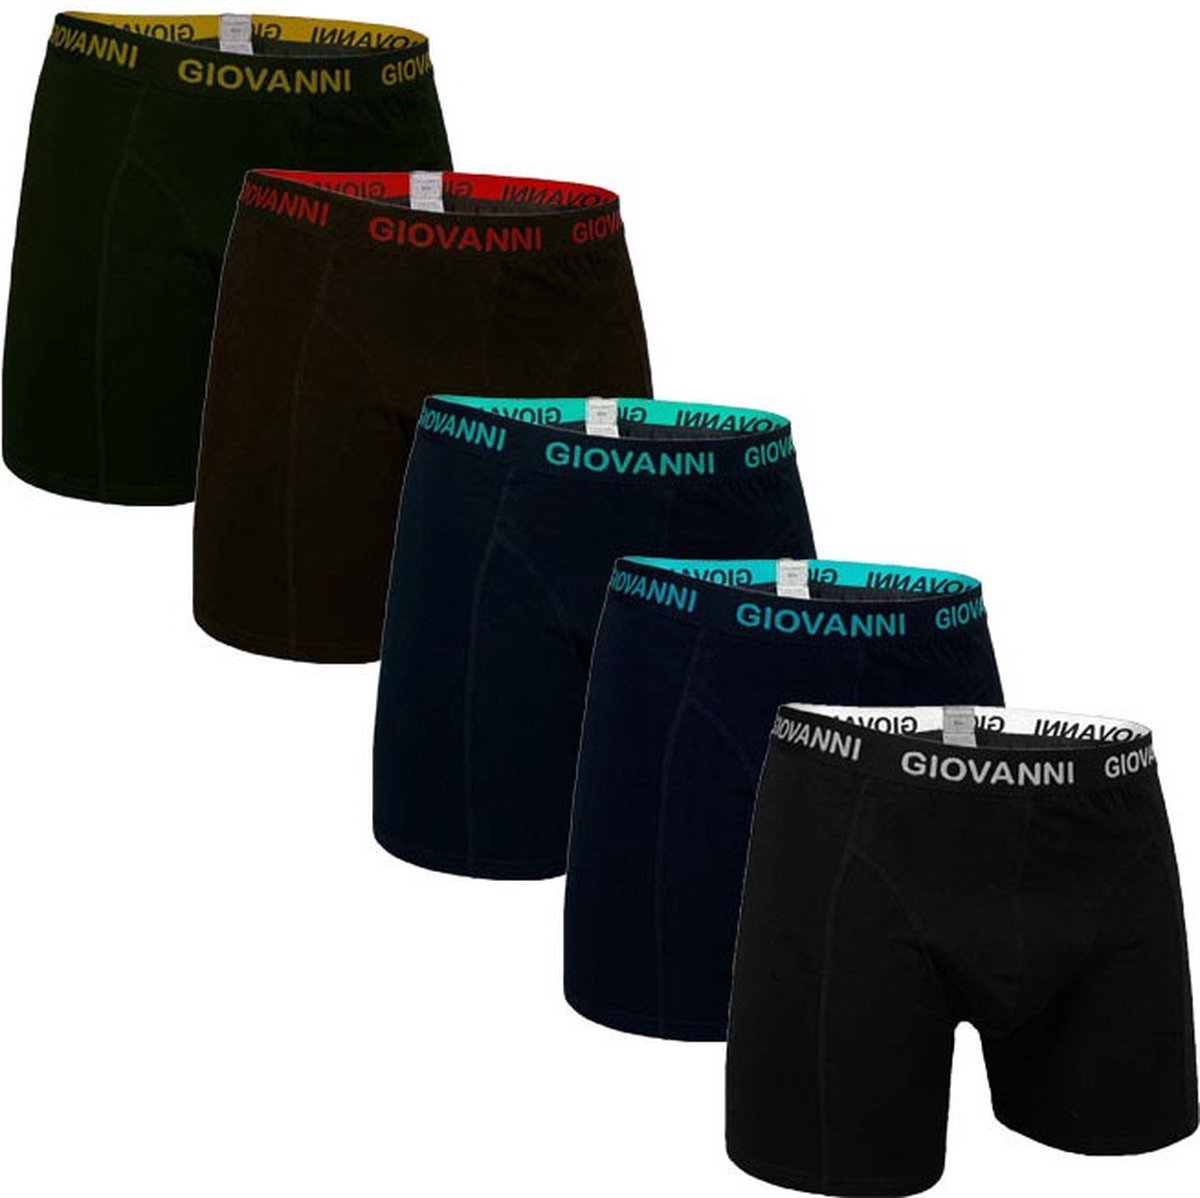 Giovanni heren boxershorts | 5-pack | MAAT XL | Black colours